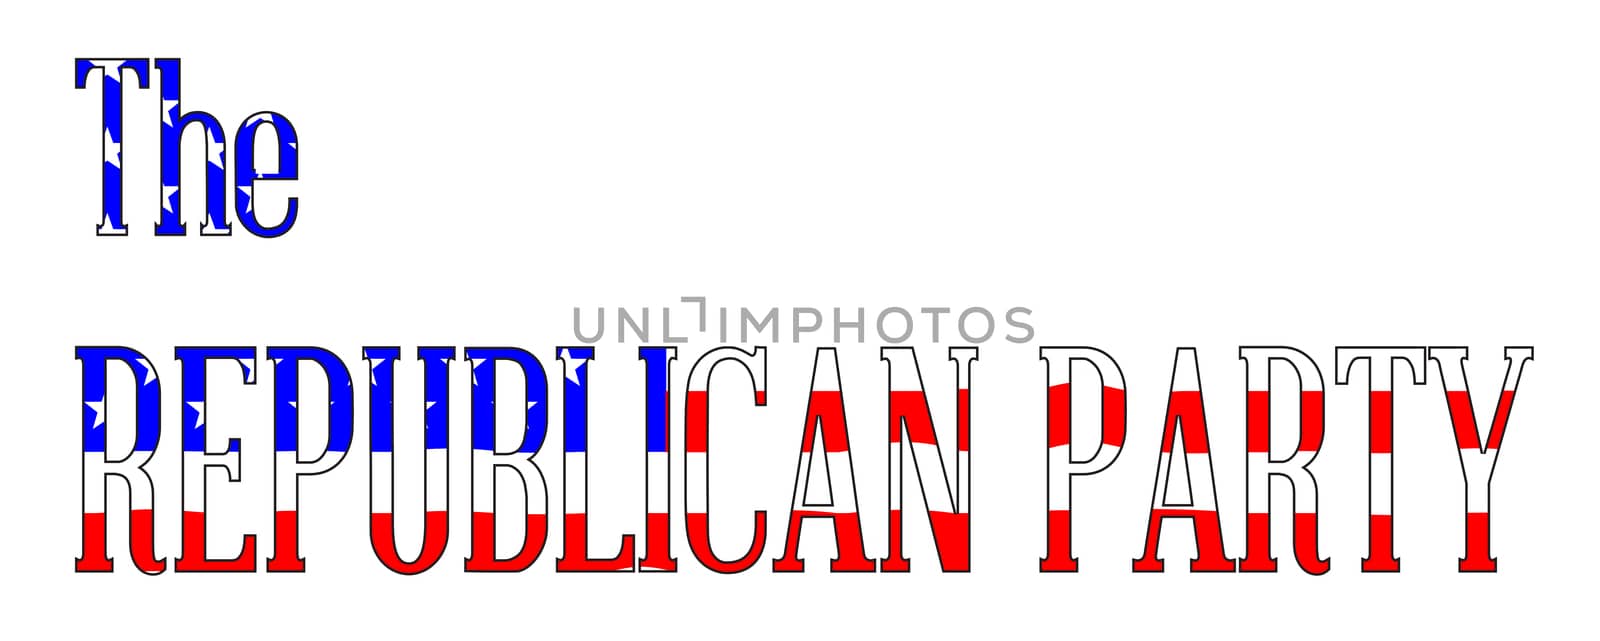 The text The Republican Party in silhouette set over the Stars and Stripes USA flag